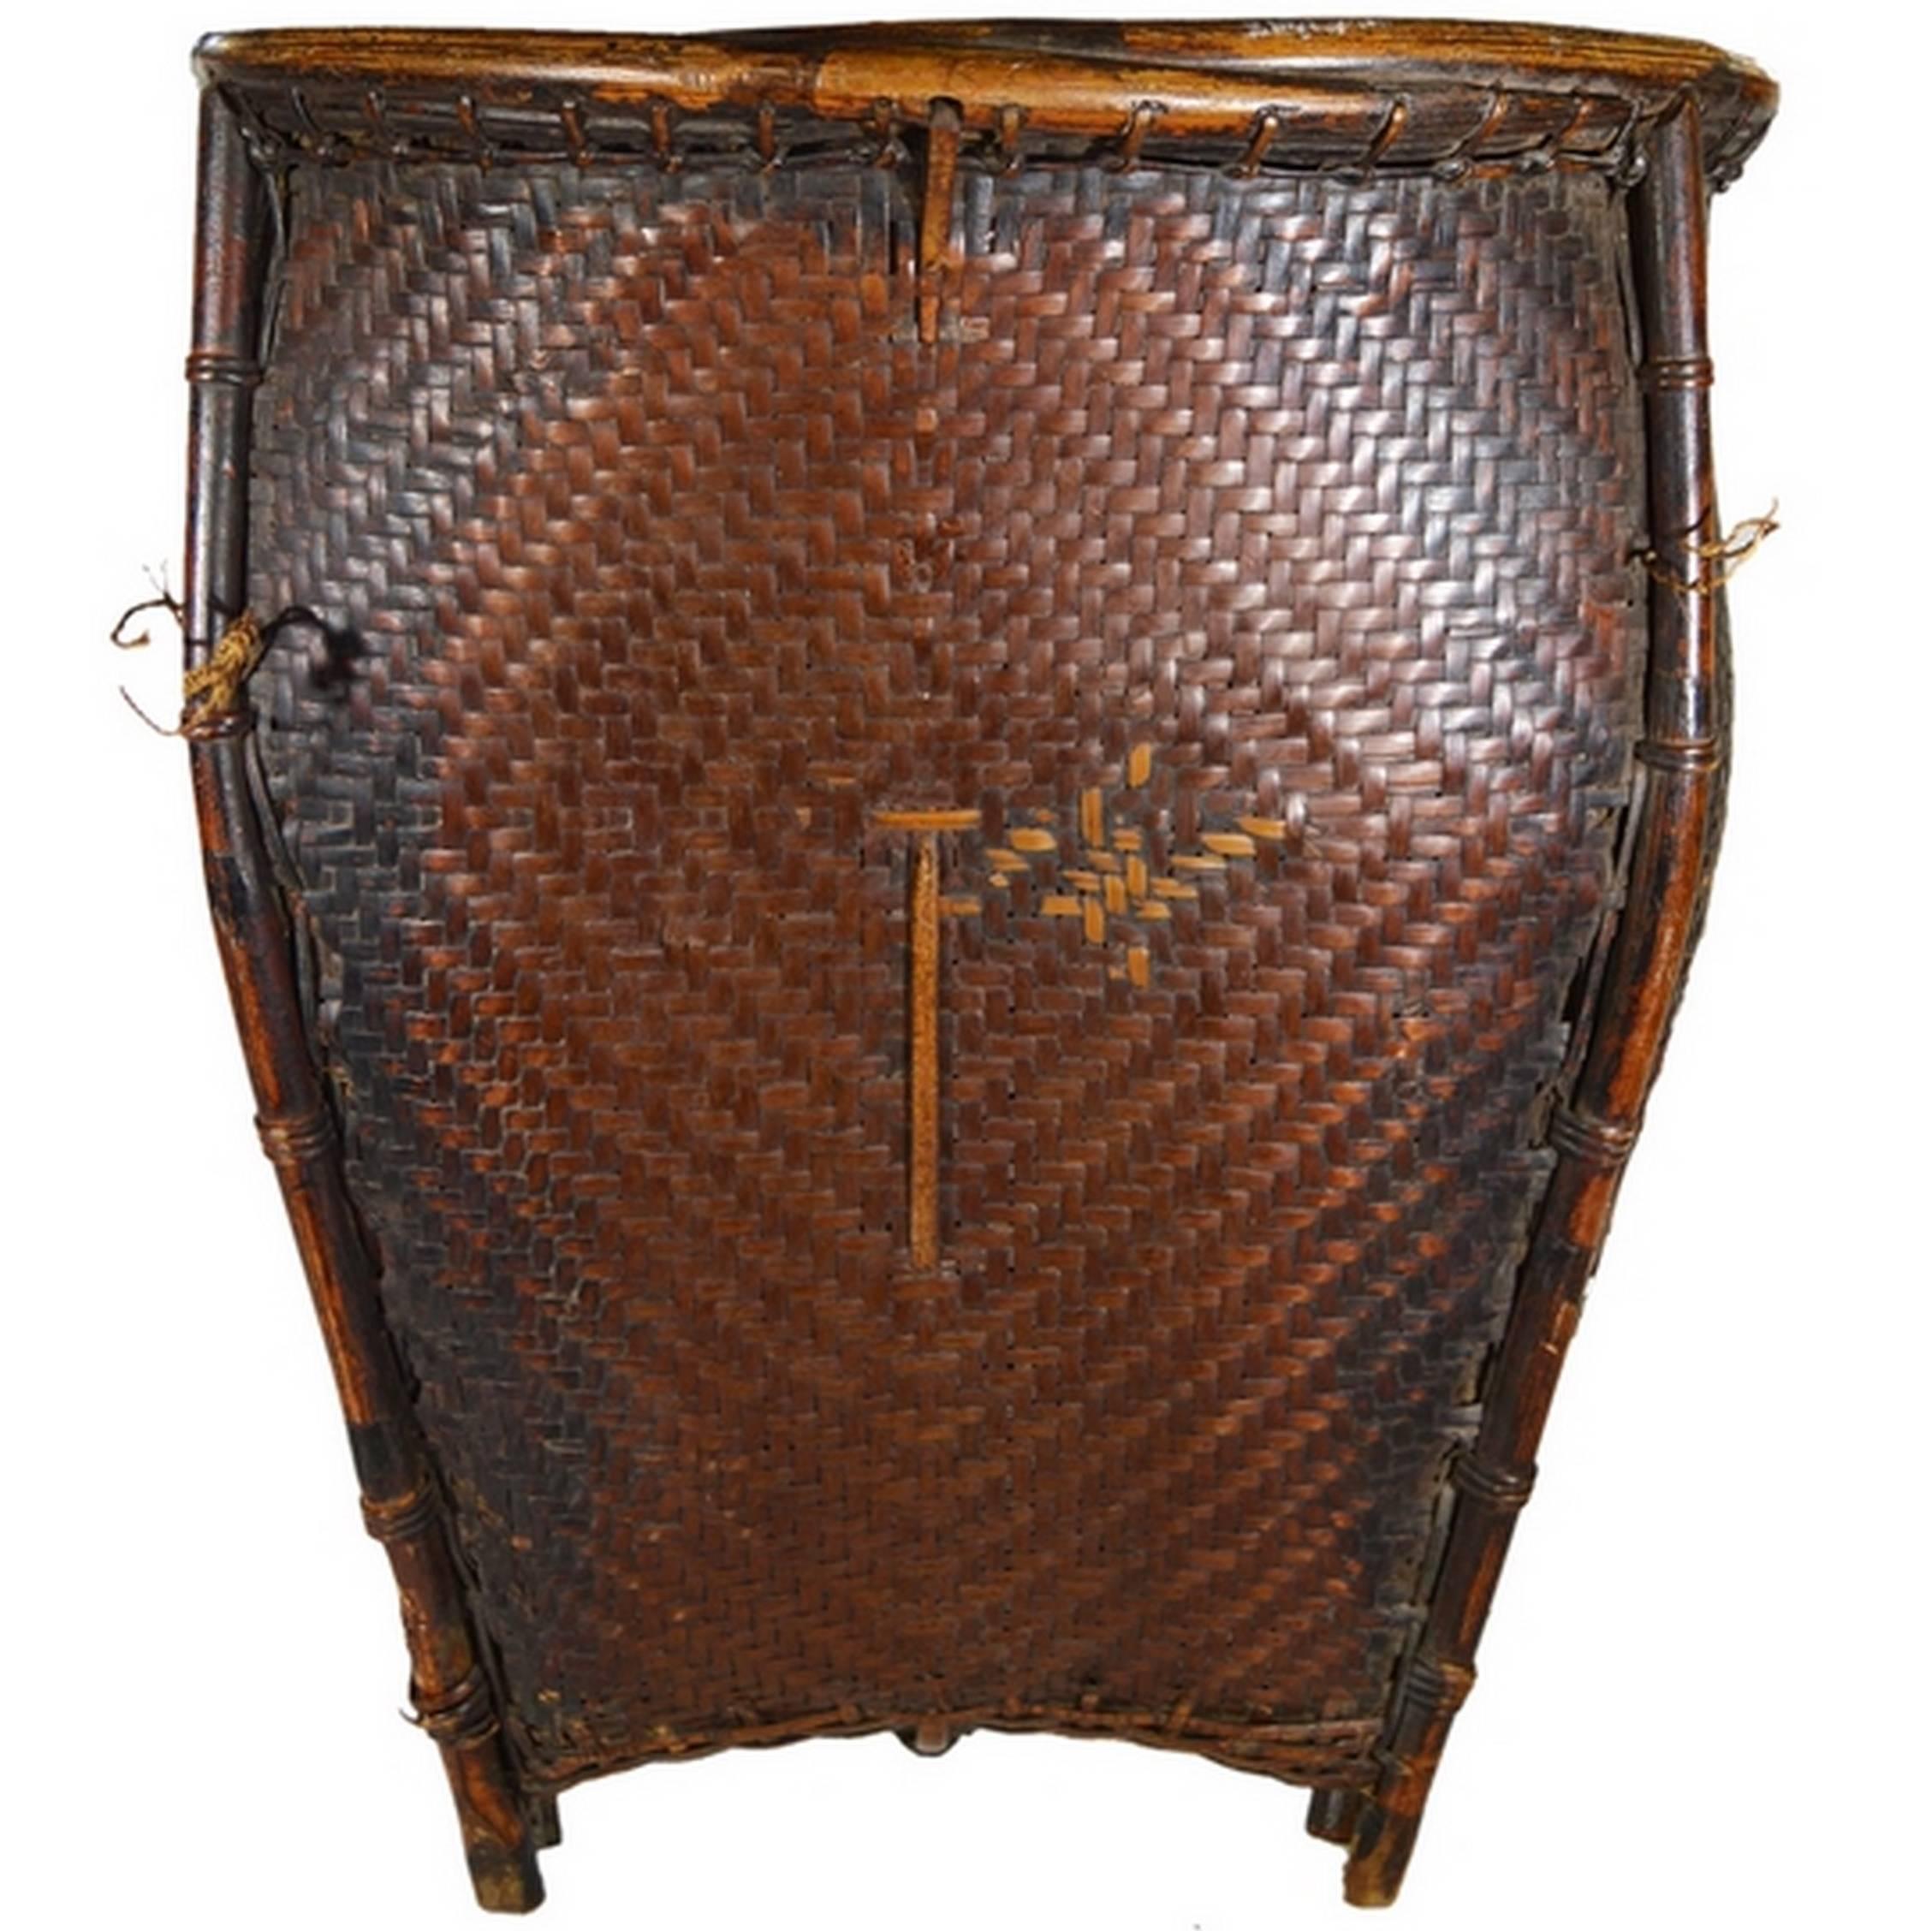 Traditional Handwoven Rattan Grain Basket from Philippines, 19th Century